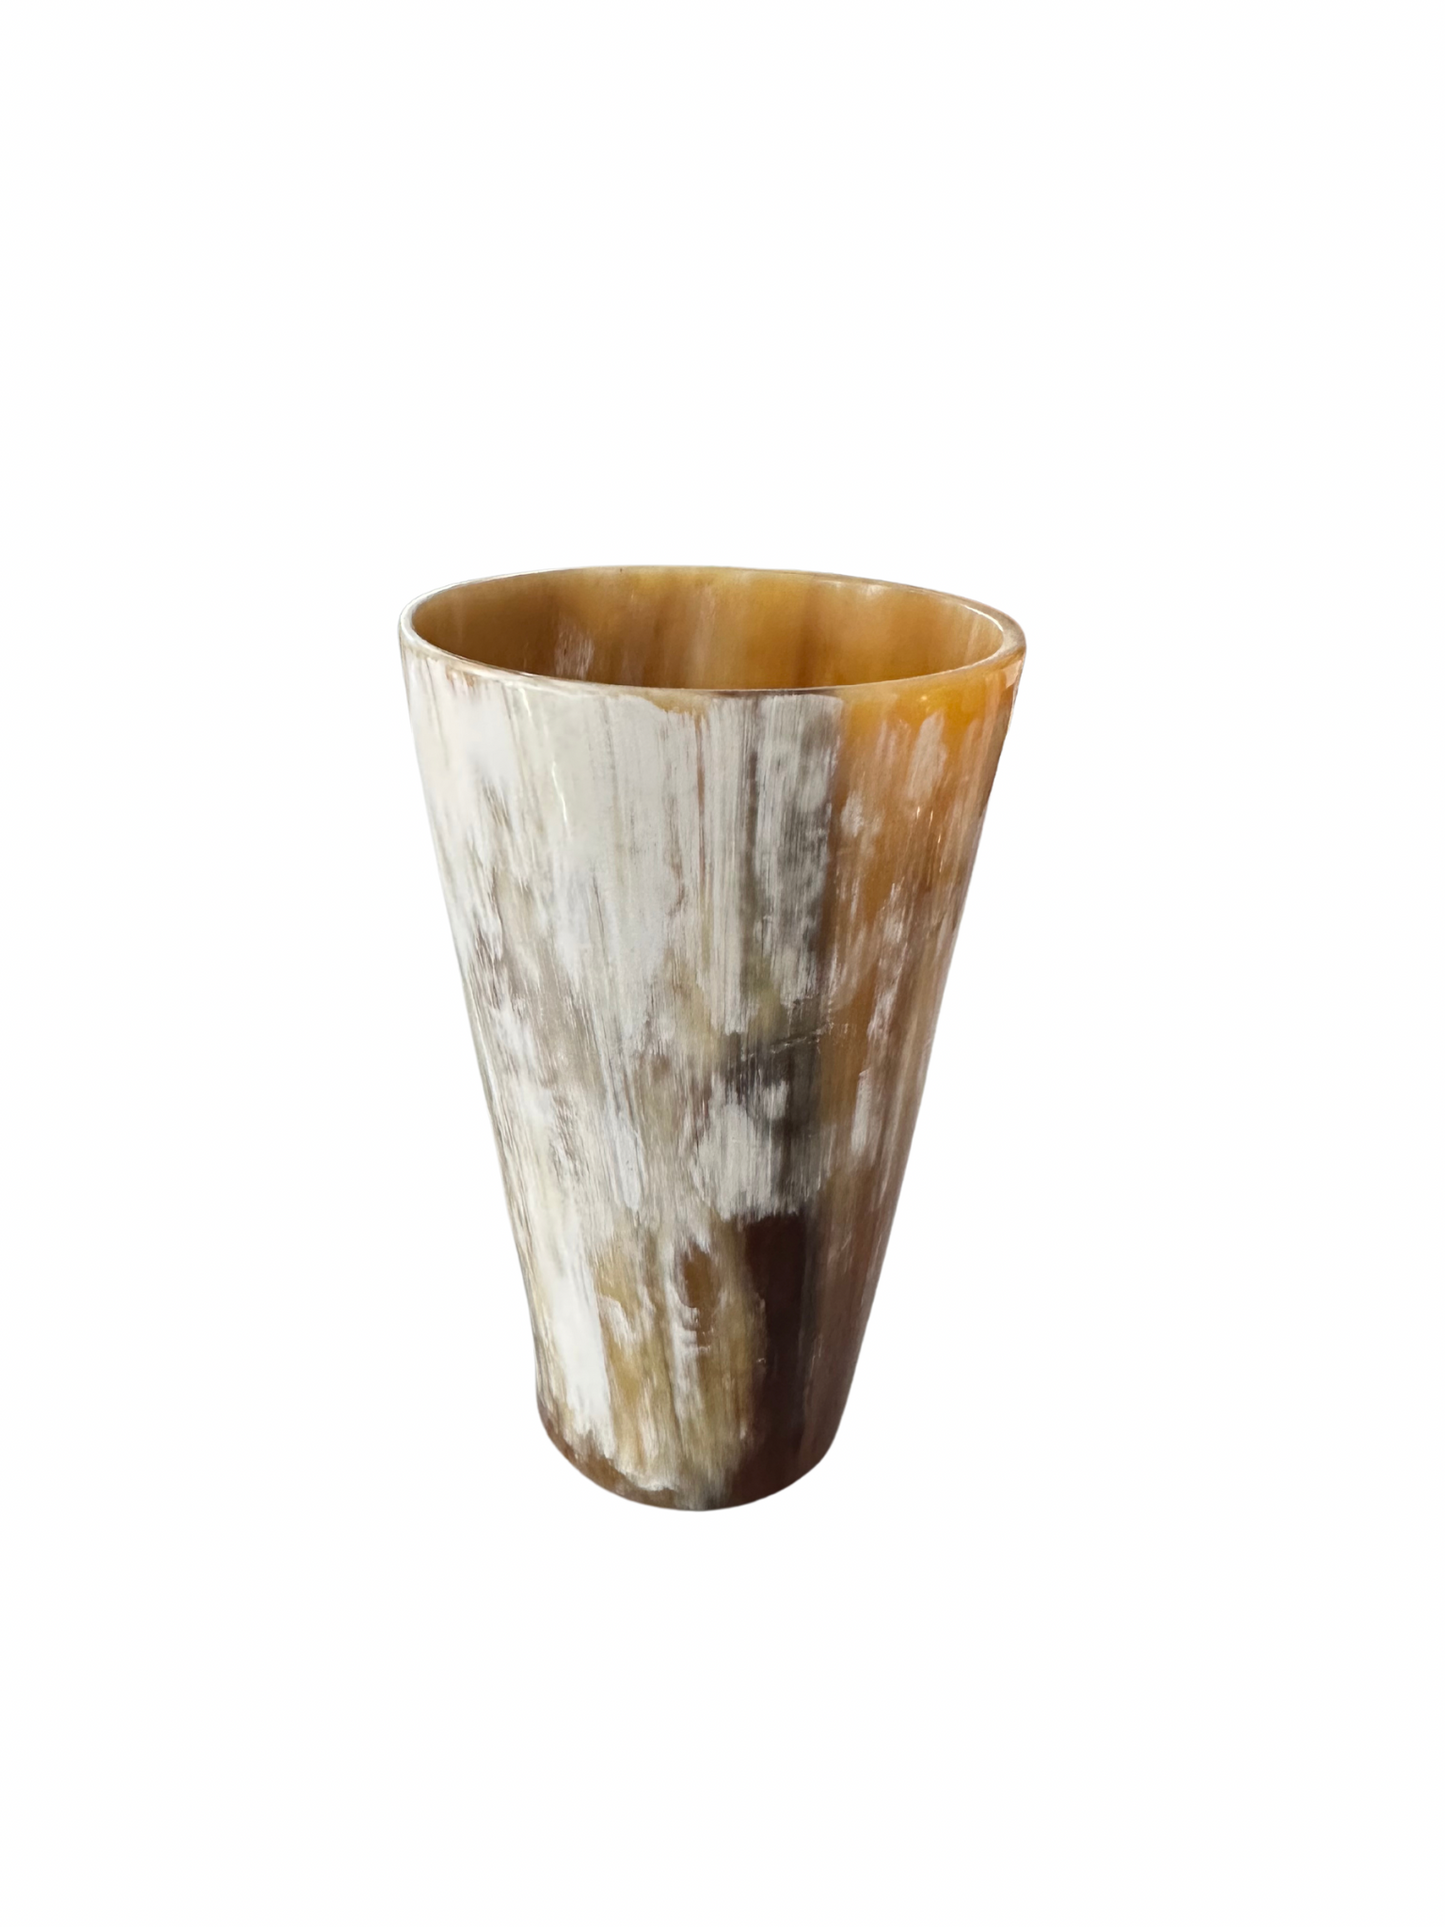 Large Ankole Cattle Horn Cup